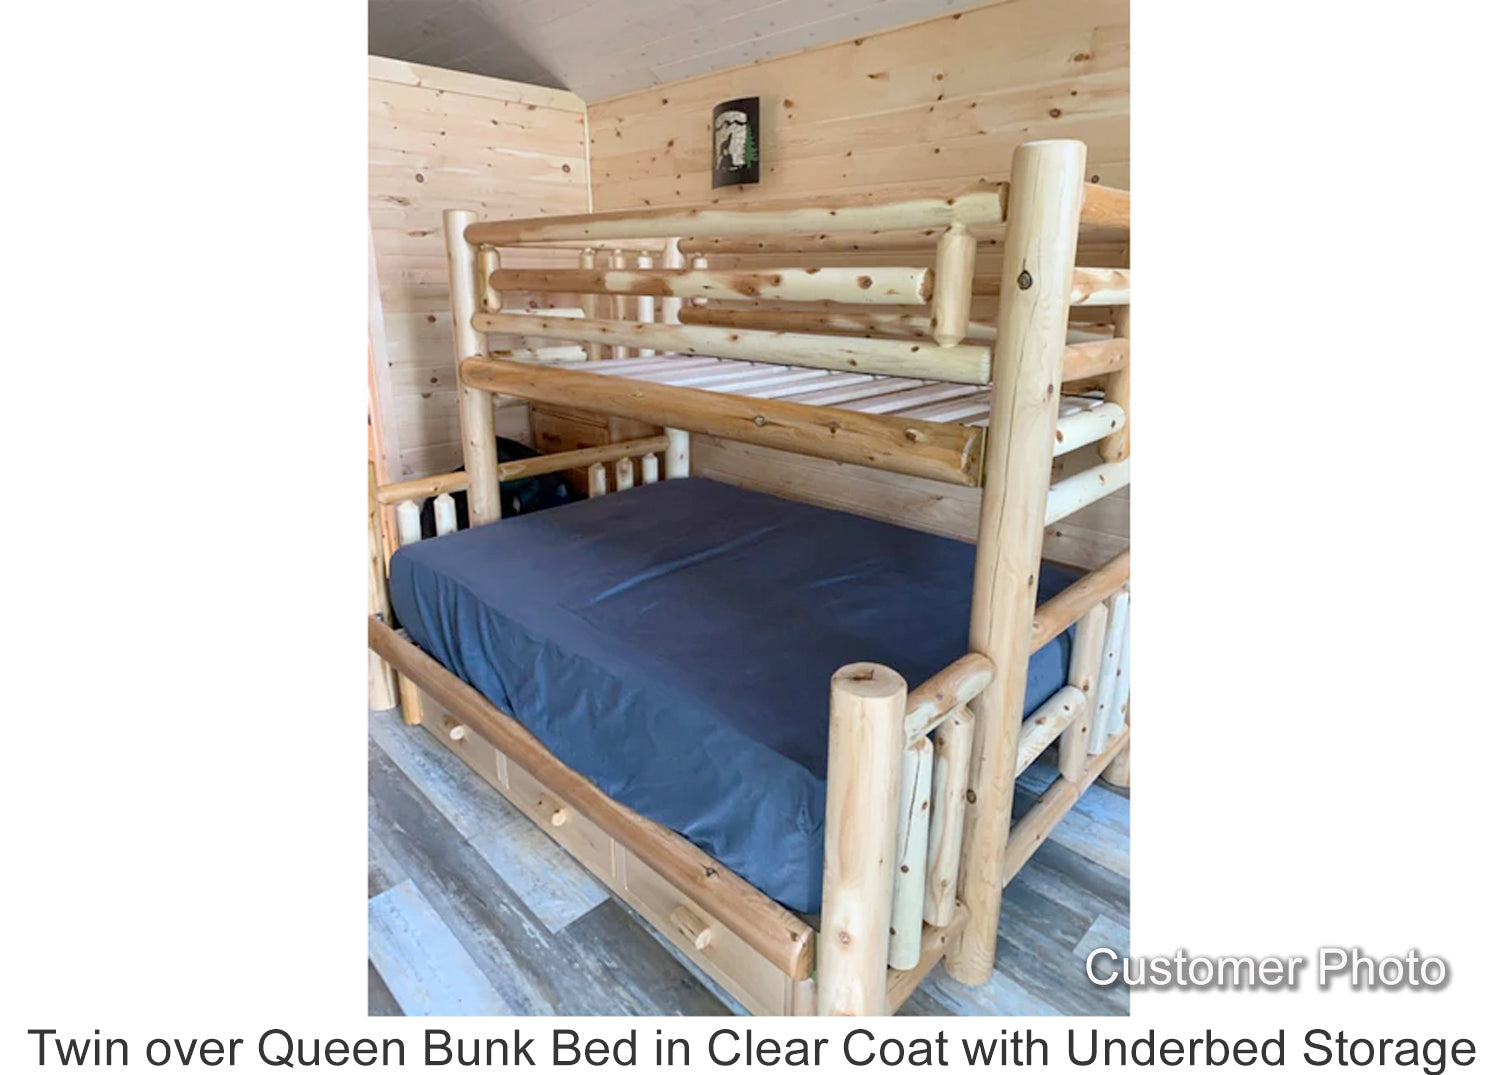 Twin over Queen Bunk Bed in Clear Coat with Underbed Storage